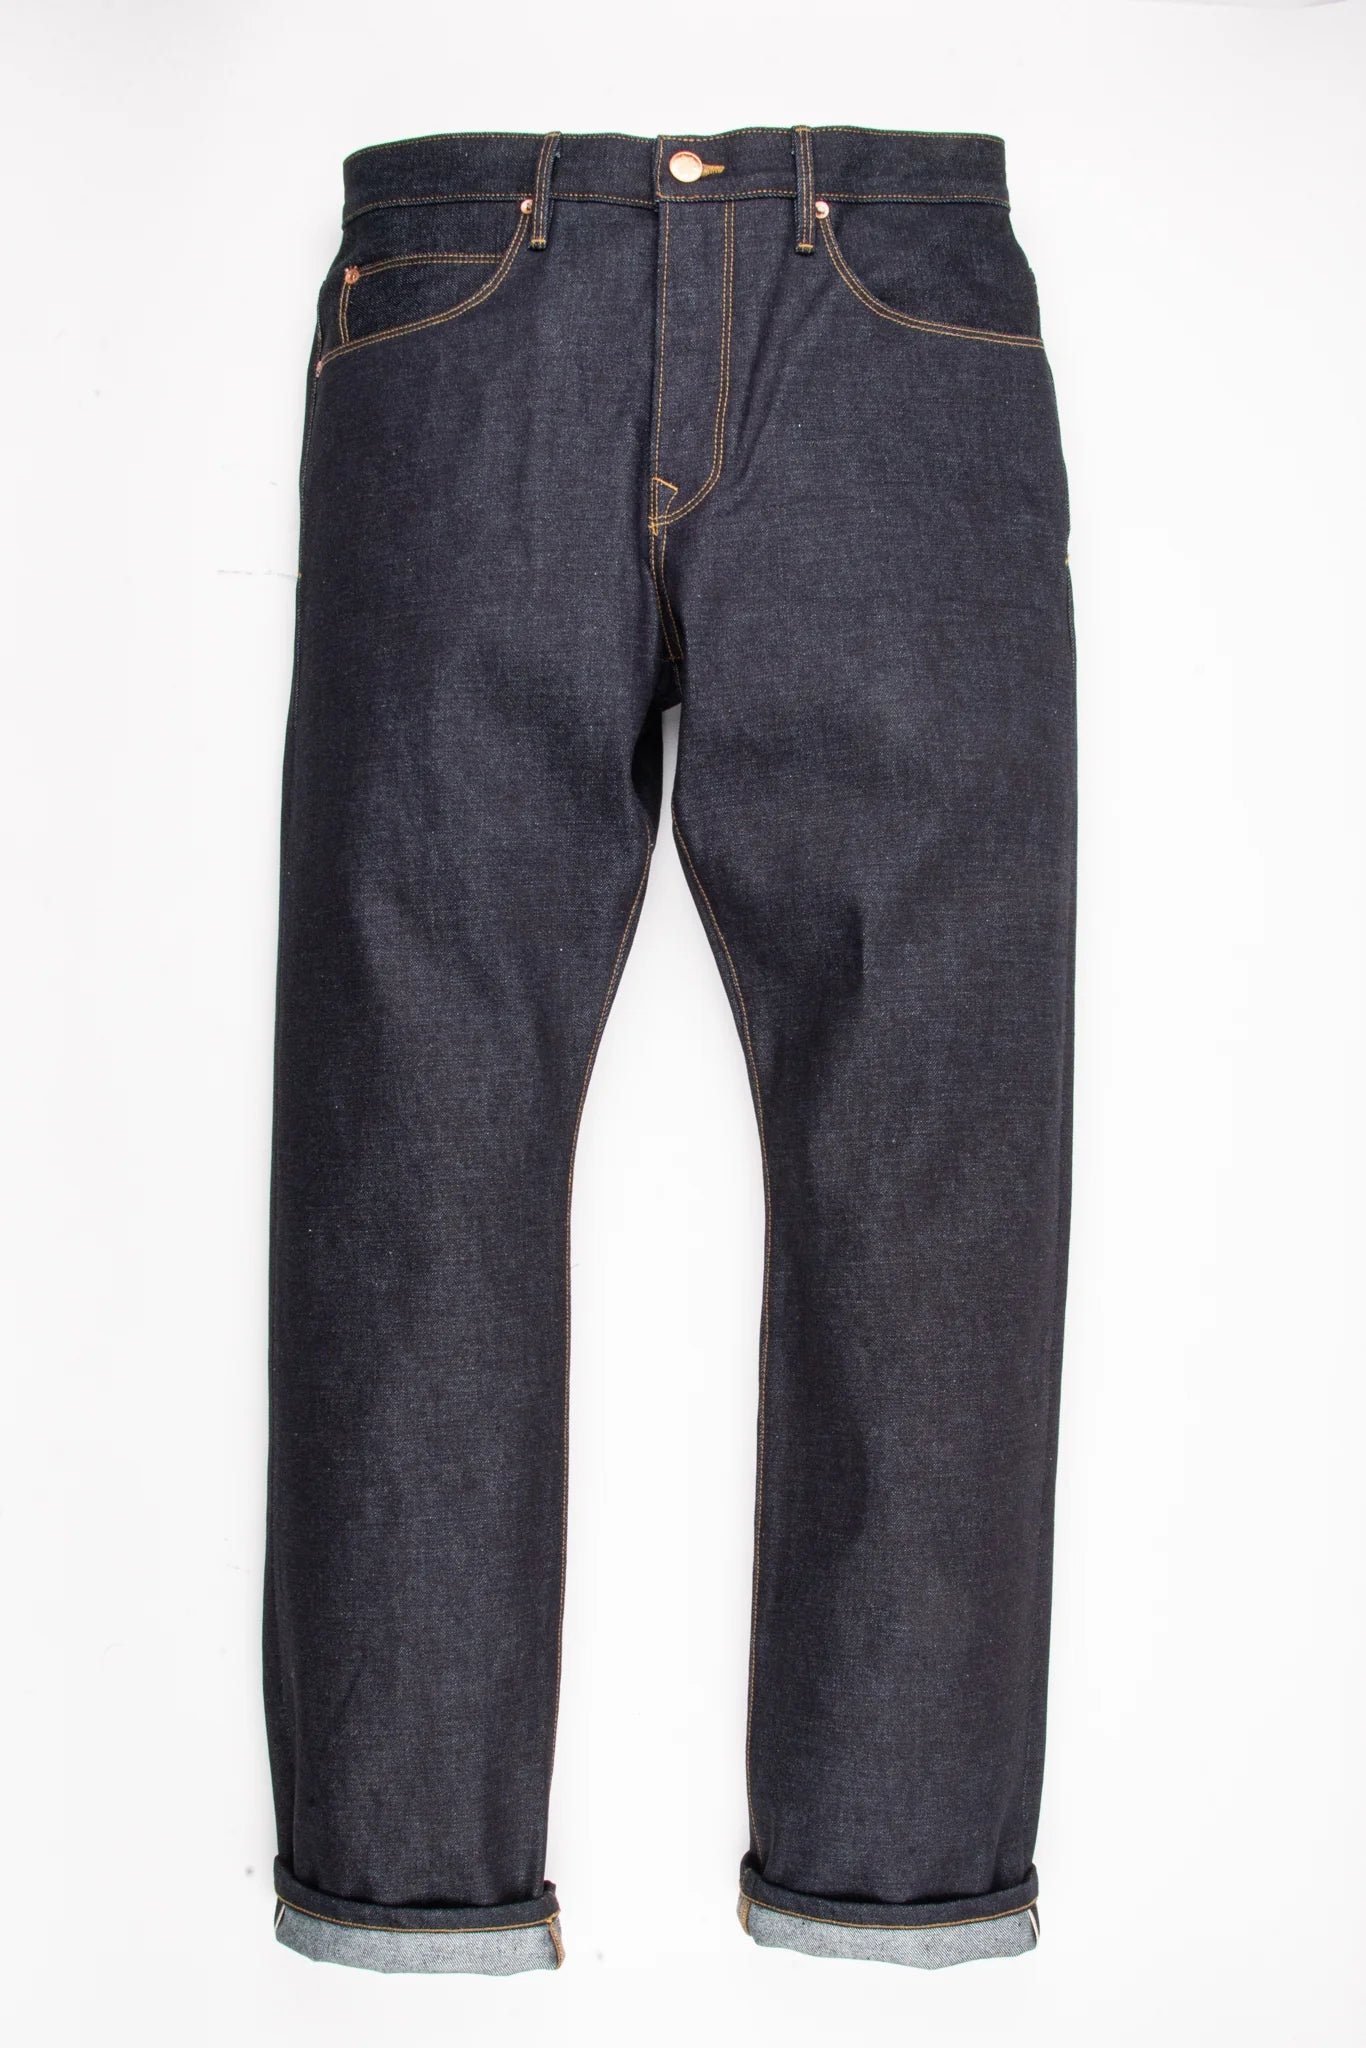 Freenote Cloth Belford Straight in 14.5 Ounce Kaihara Denim - Earl's  Authentics